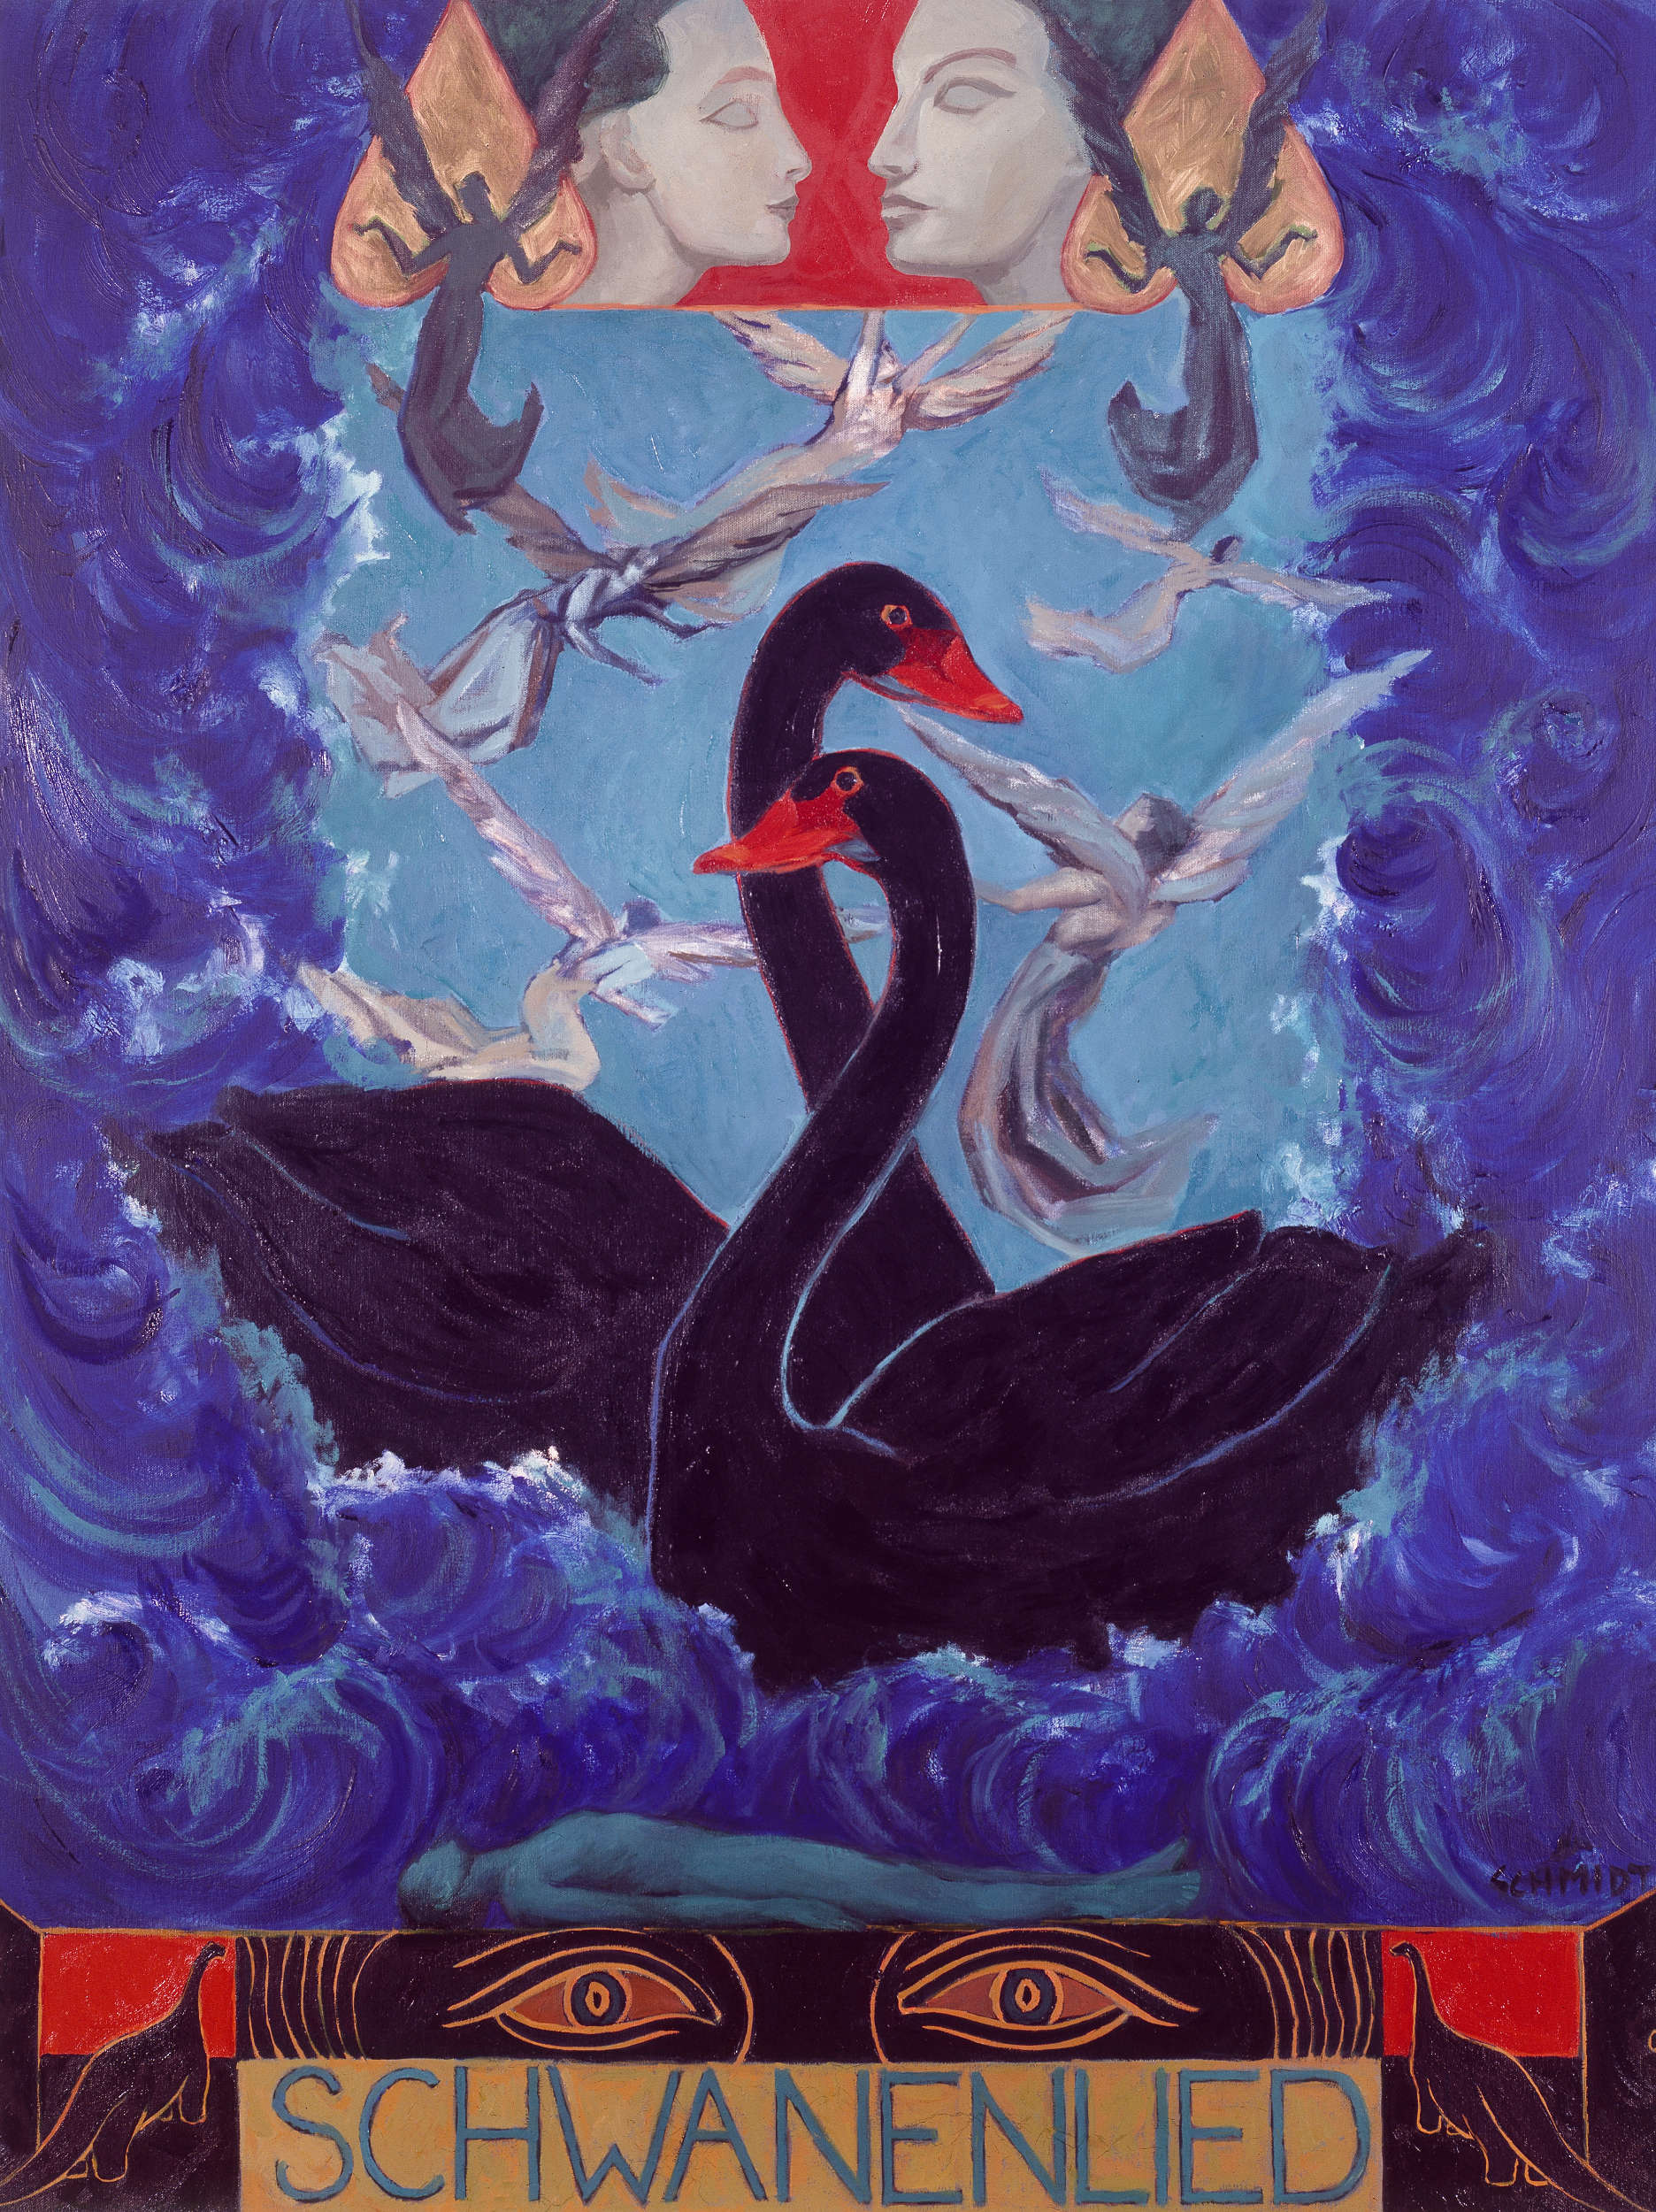 Two black swans surrounded by tumultuous waters upside down hearts, dead female figure